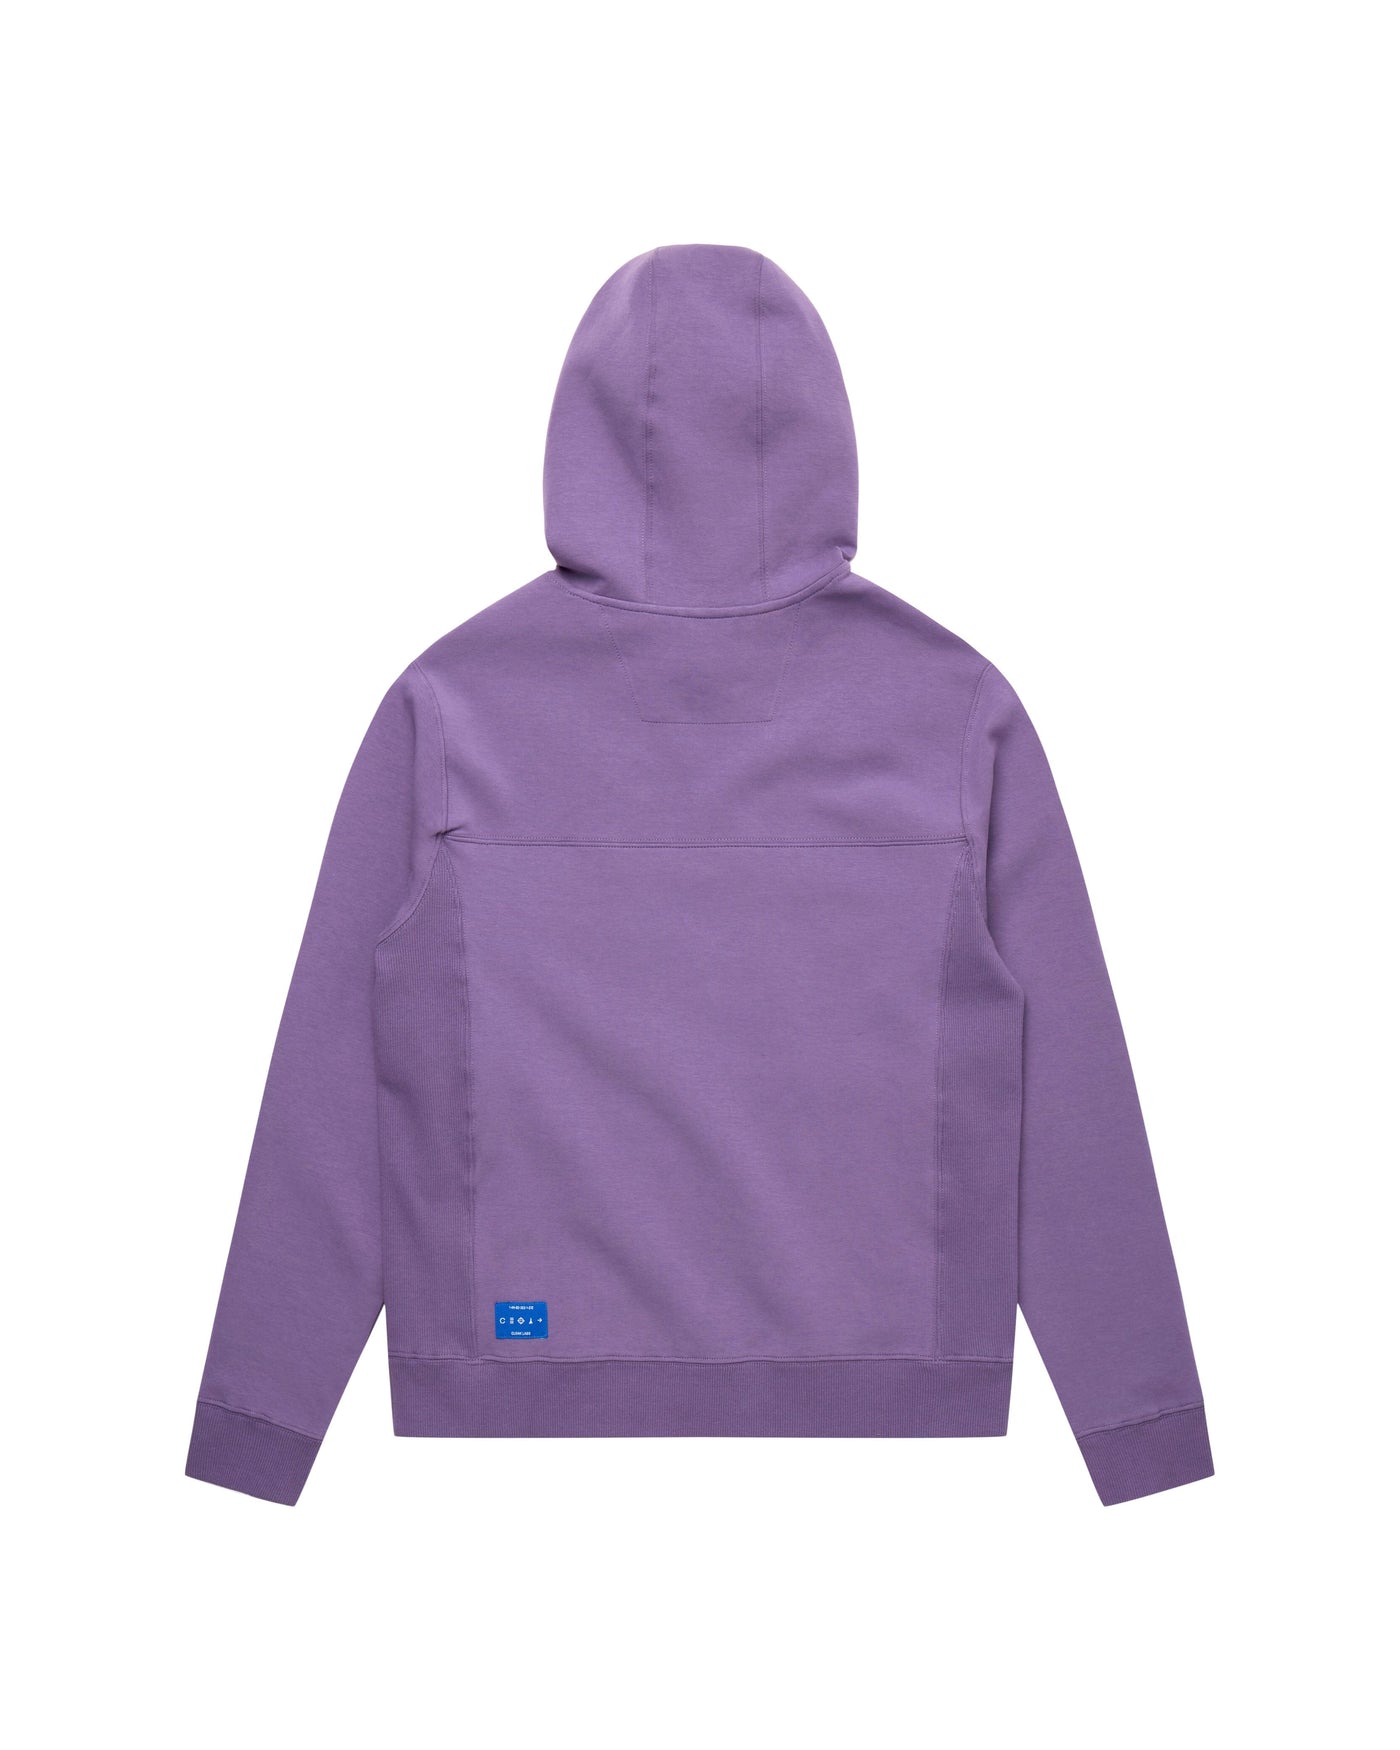 TH TACTICAL HEAT PULLOVER HOOD PURPLE REIGN HOODIE TACTICAL HEAT 